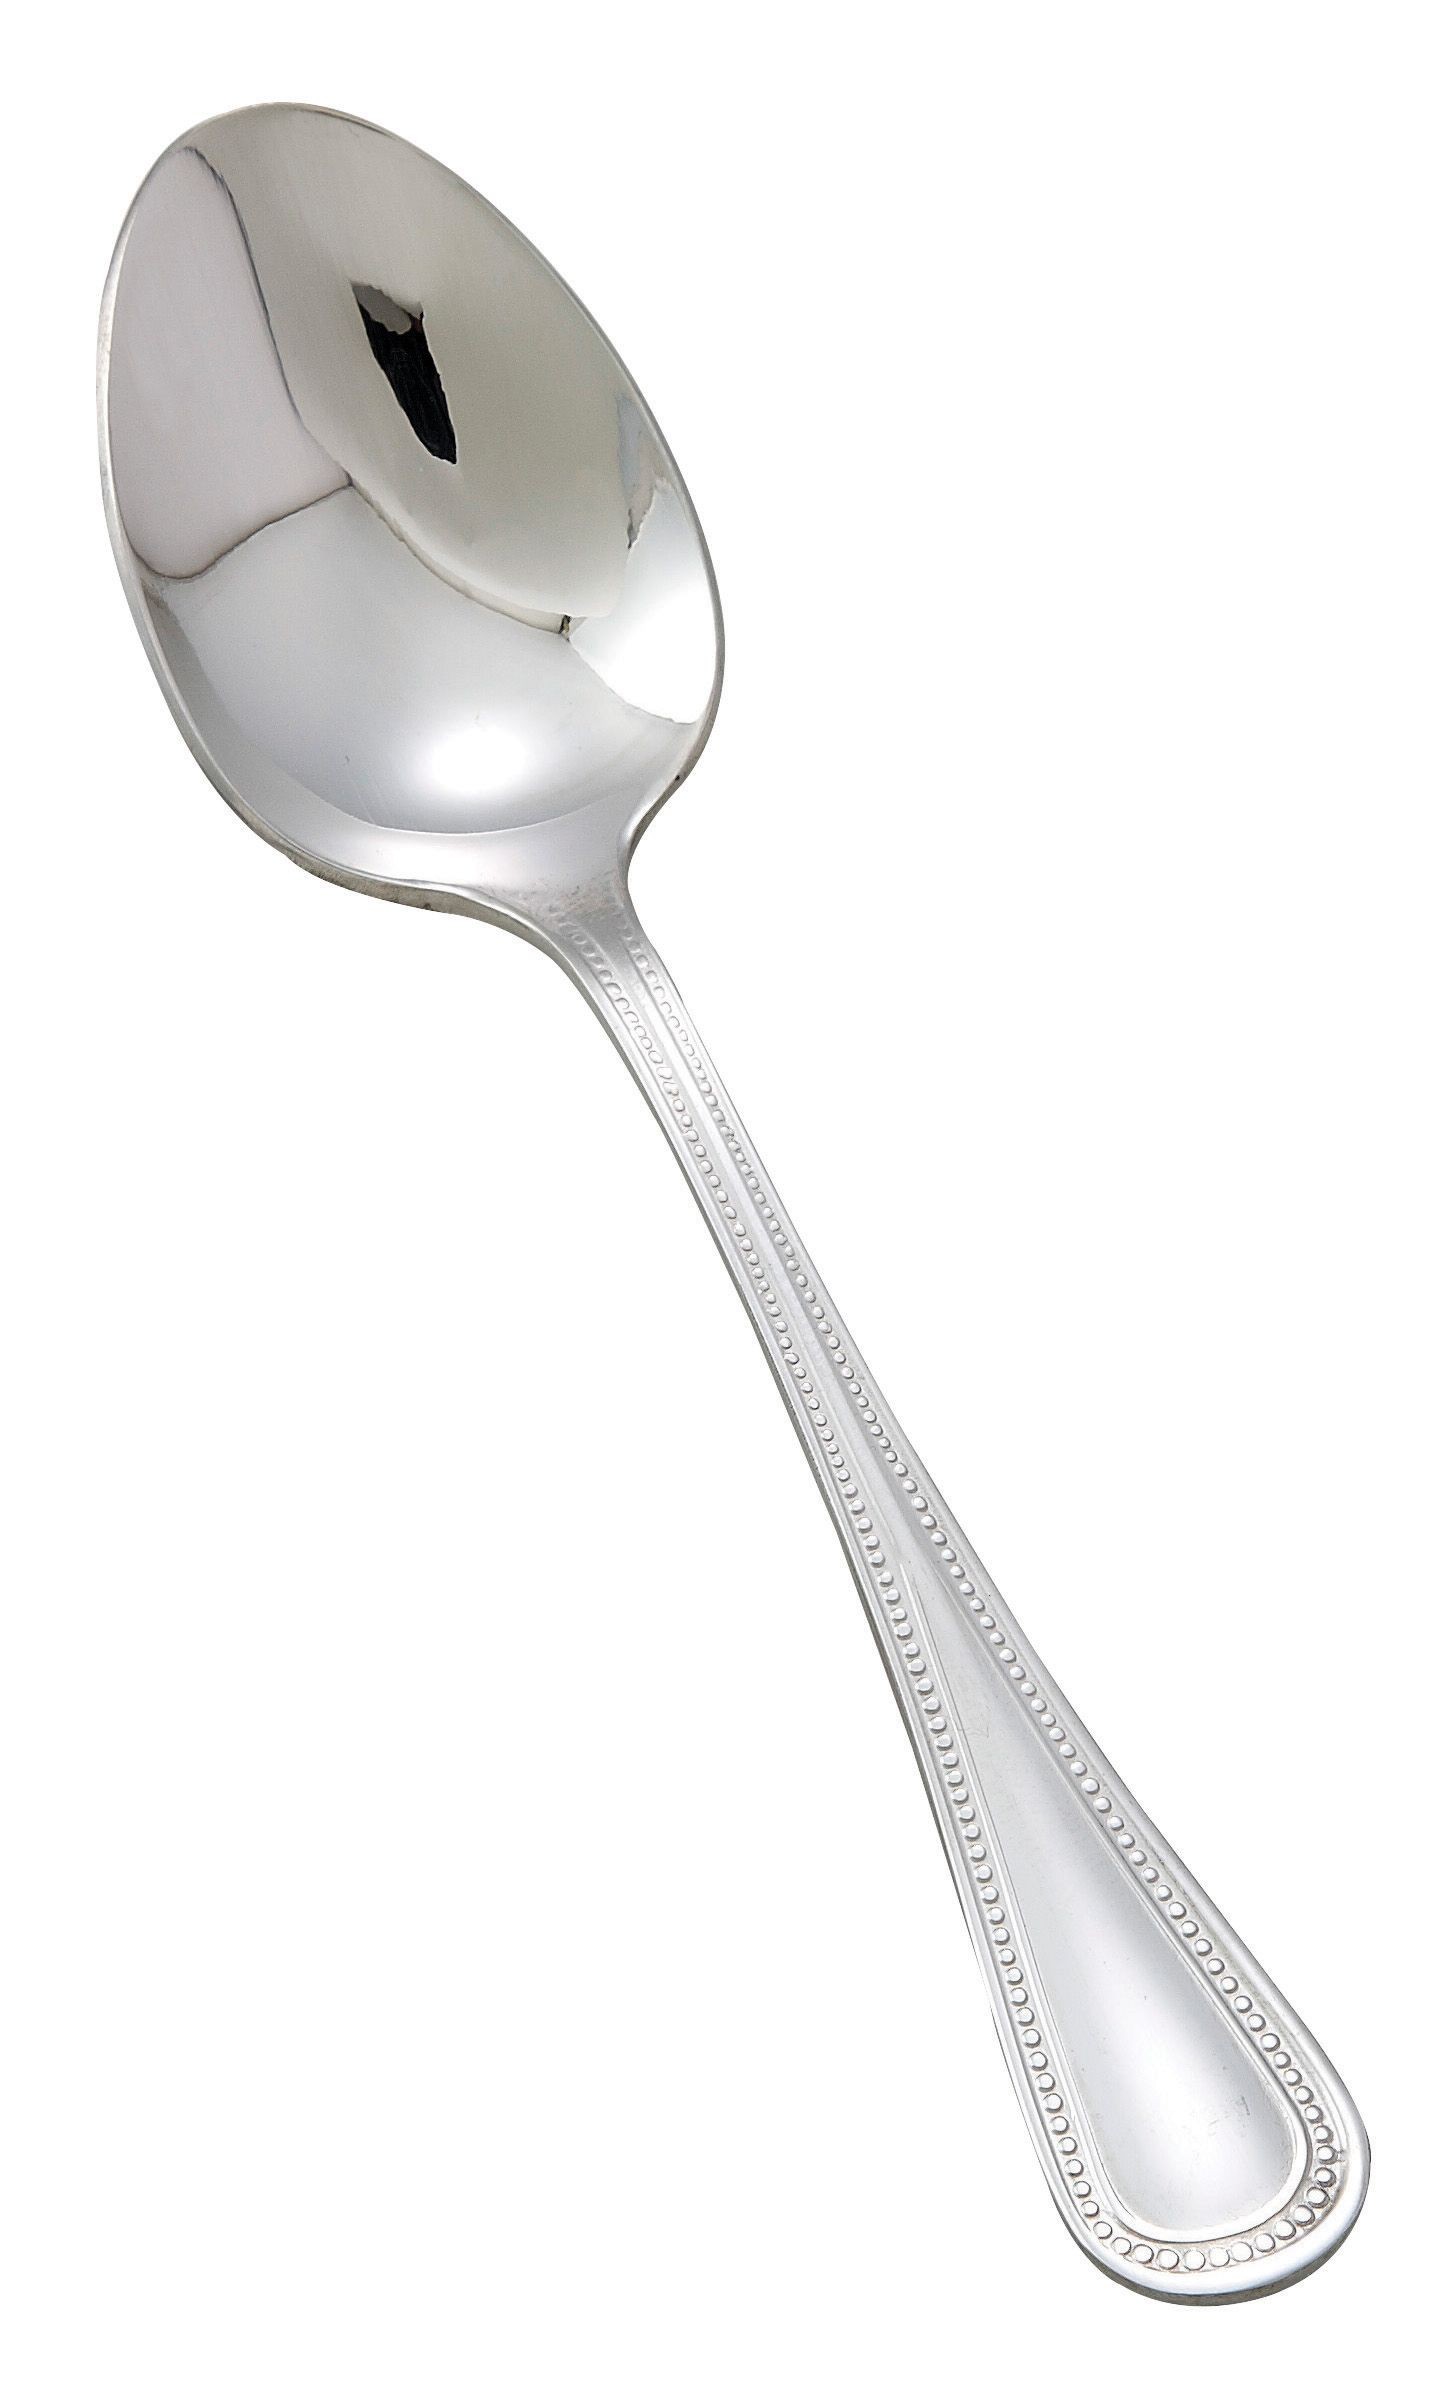 Winco 0036-01 Deluxe Pearl Extra Heavy Stainless Steel Teaspoon (12/Pack)